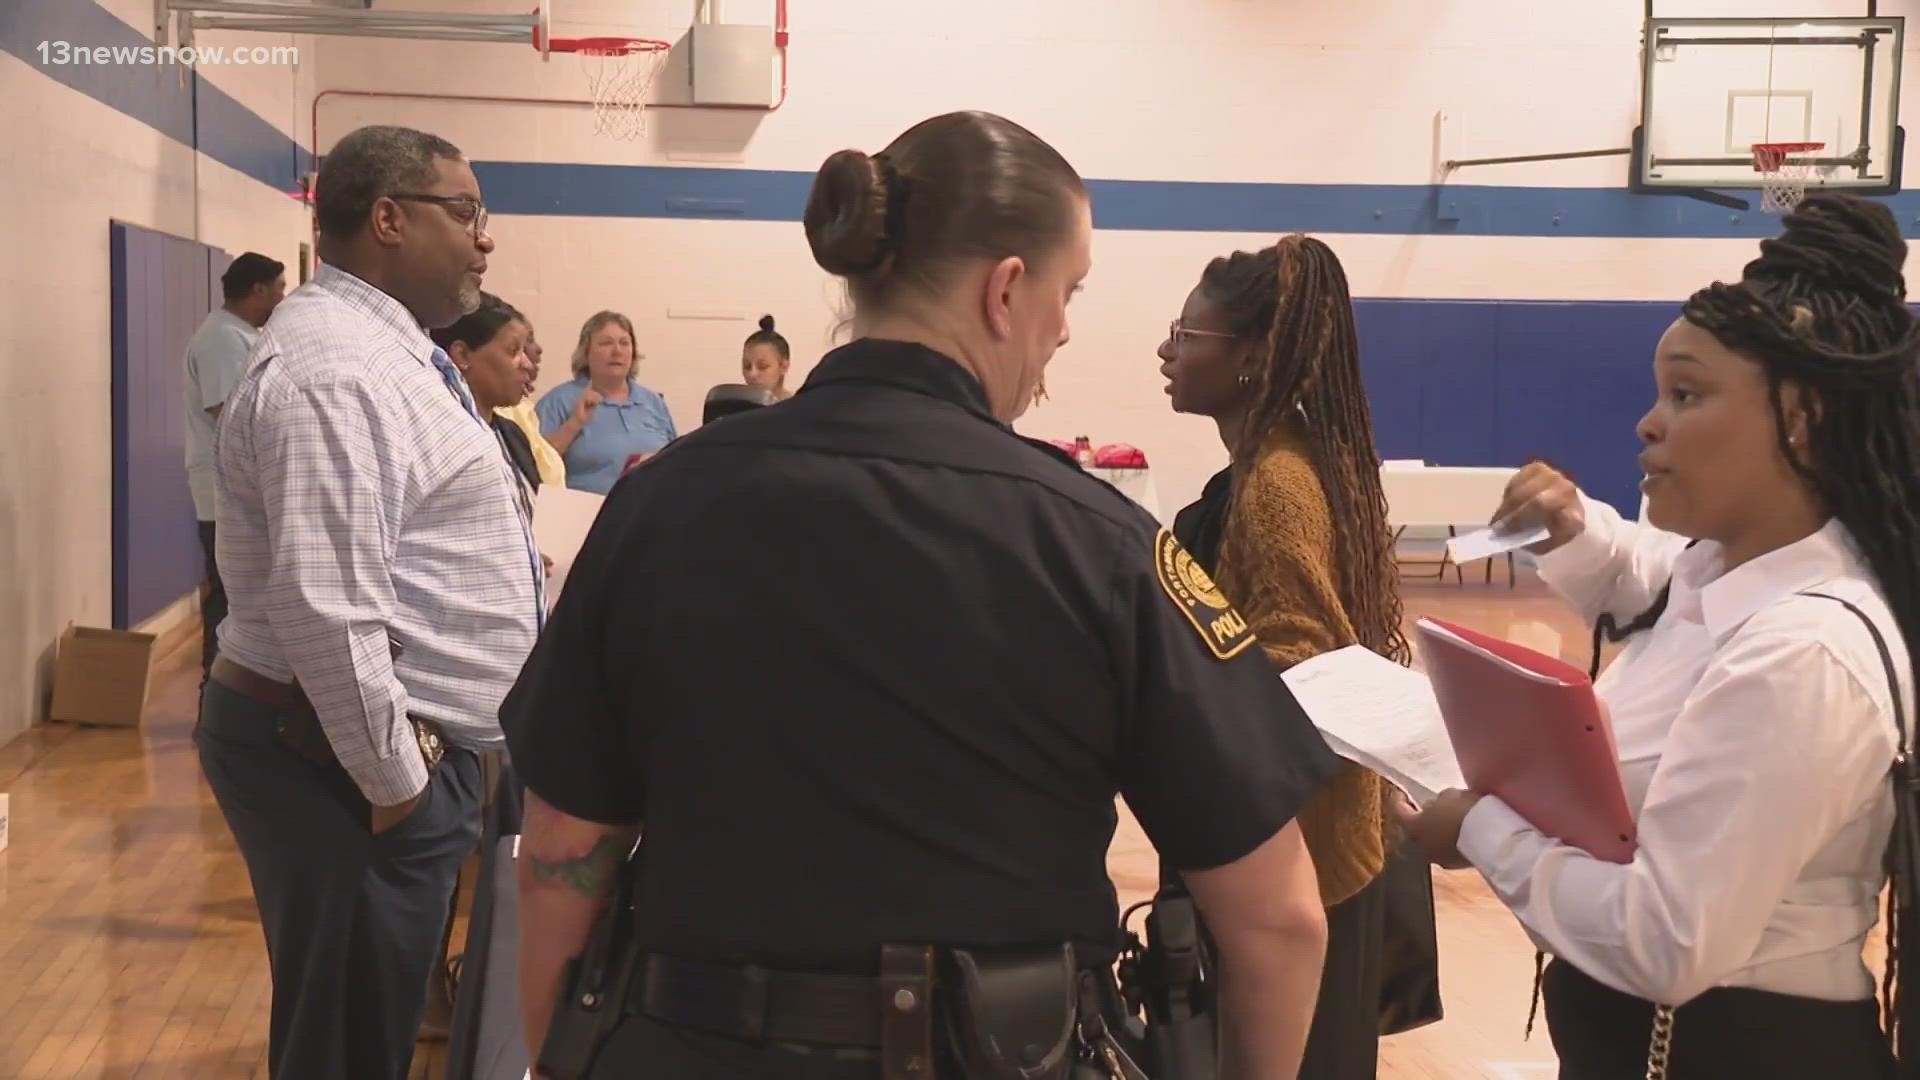 For the first time in nearly 10 years, the City of Portsmouth held its own job fair. The city needs to fill more than 100 openings across city departments.